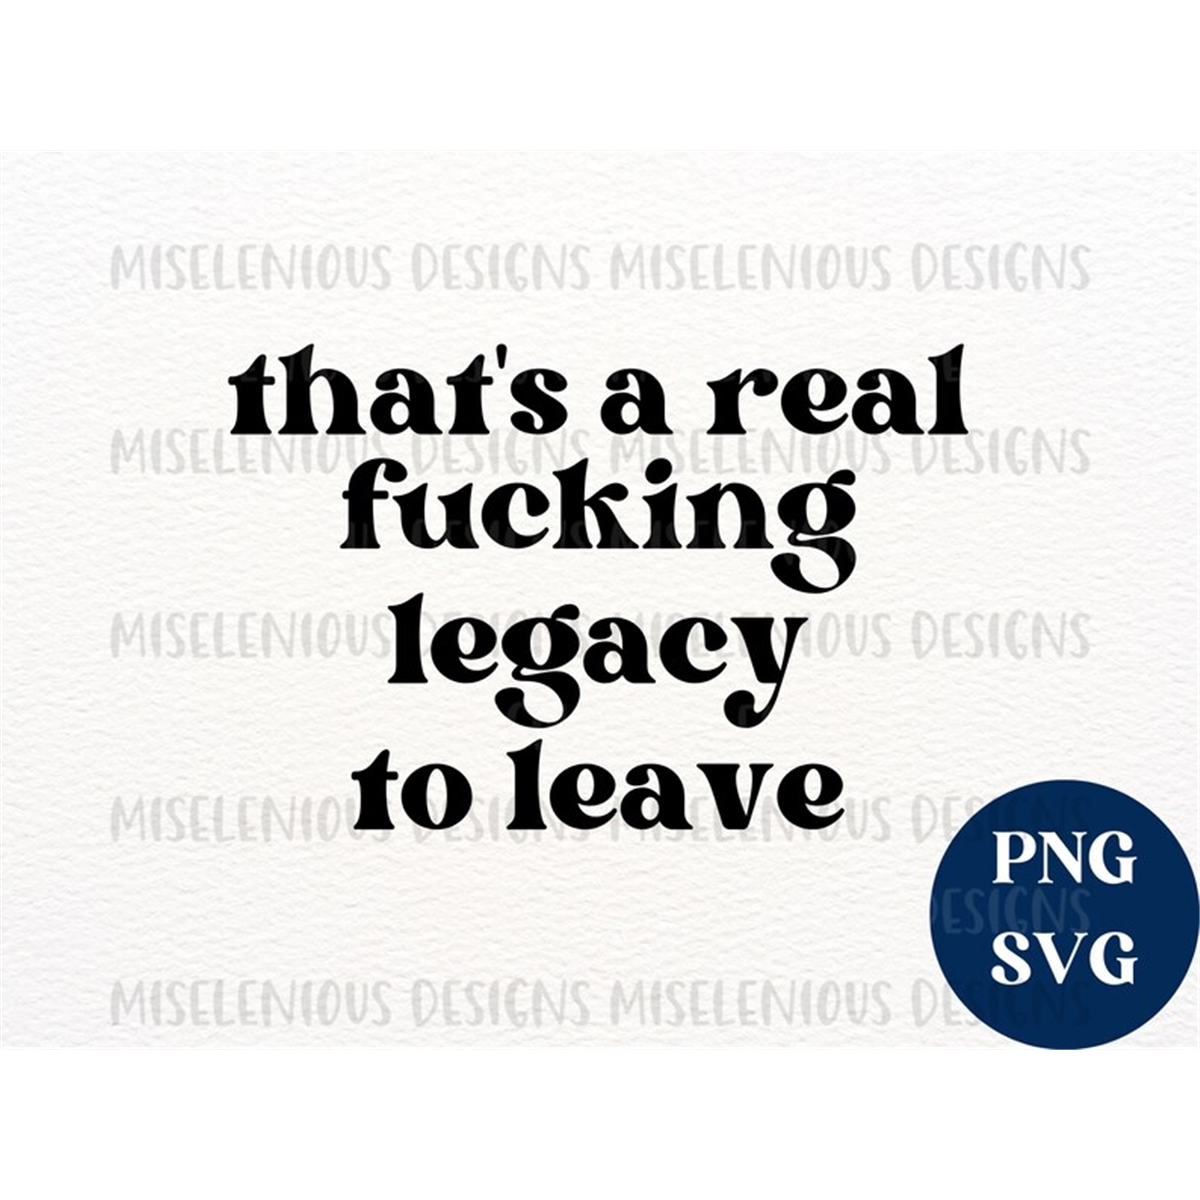 thats-a-real-fucking-legacy-to-leave-lyrics-png-svg-image-1